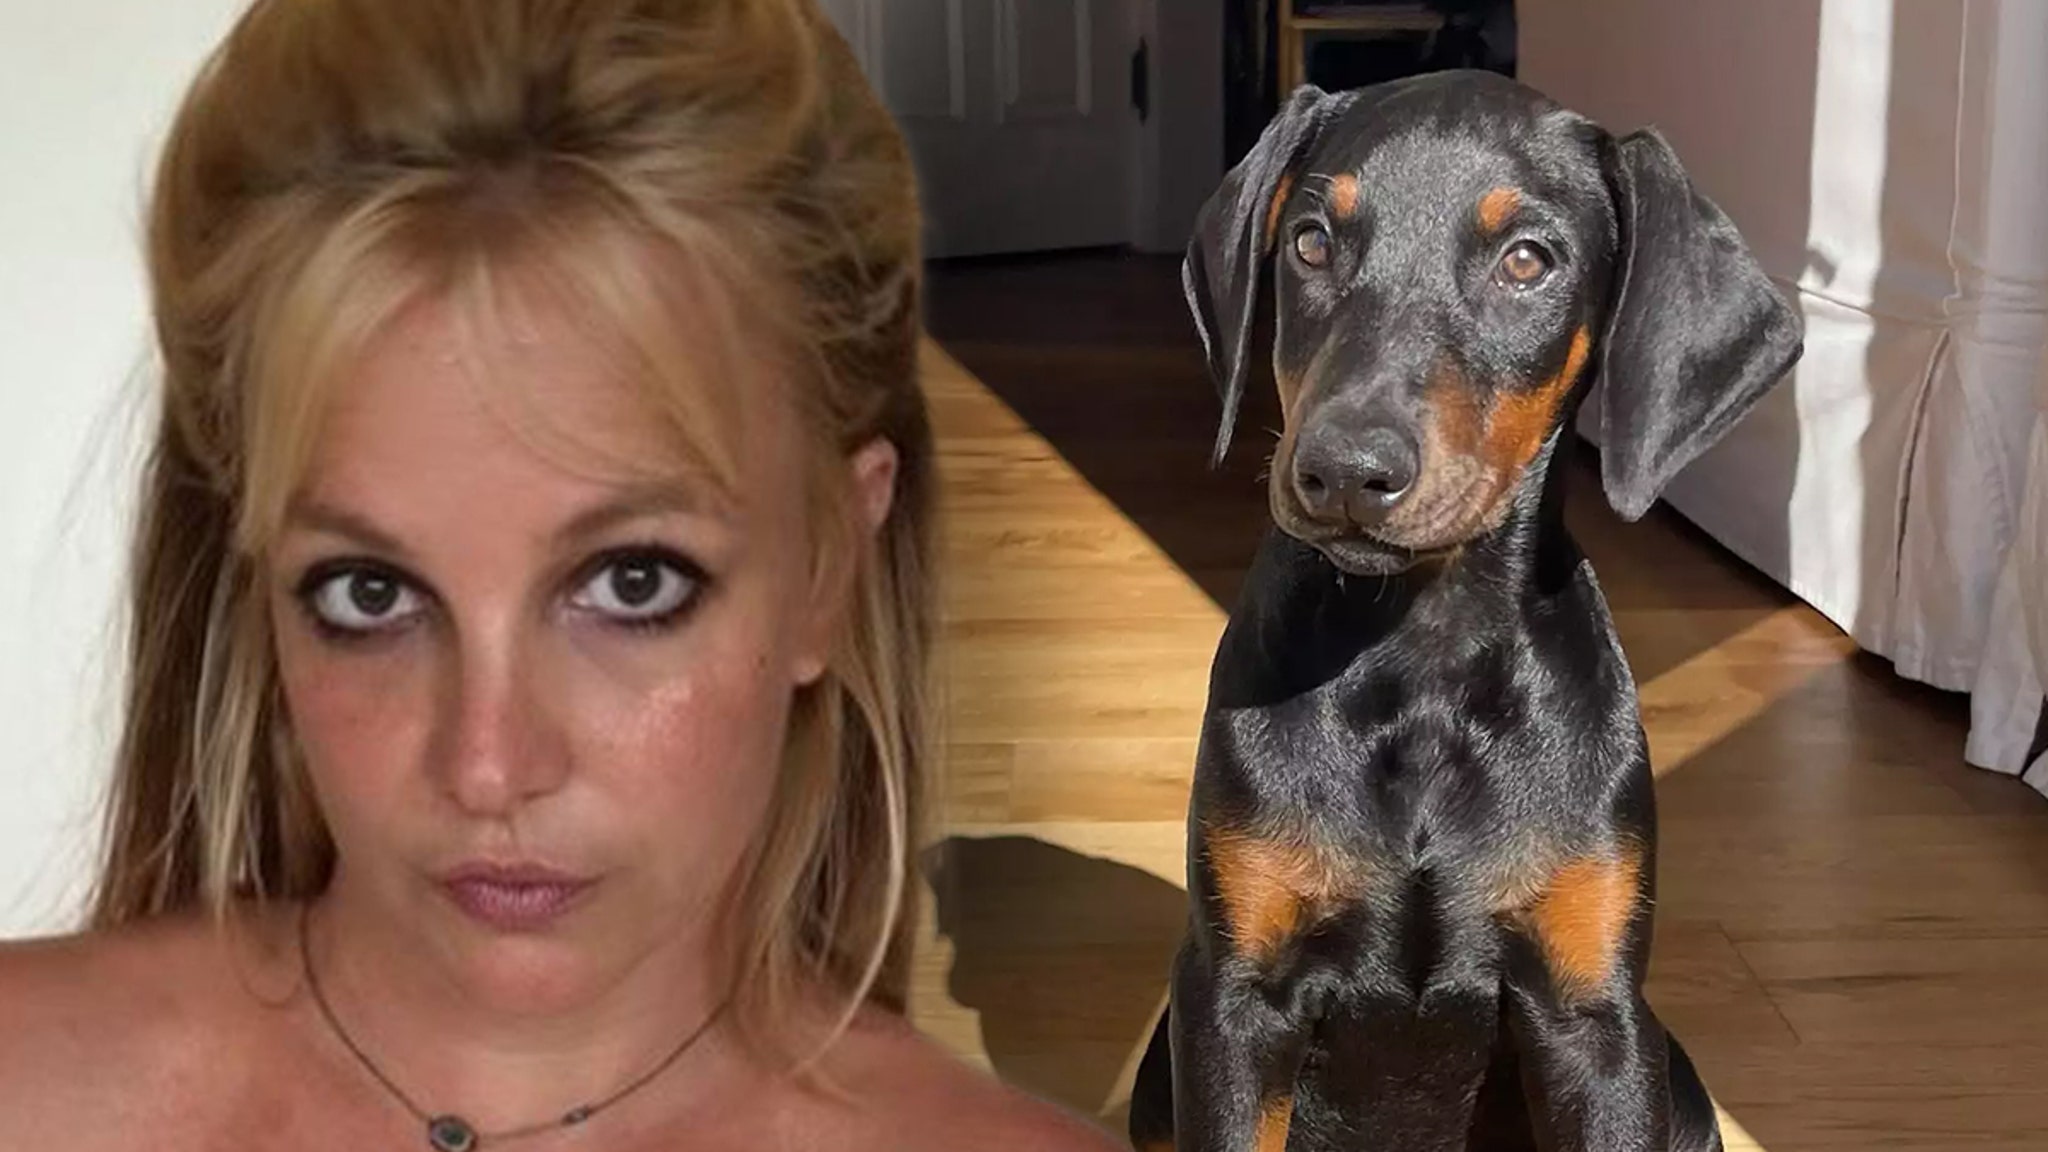 Britney Spears has been warned by animal control after a dog stung an elderly man